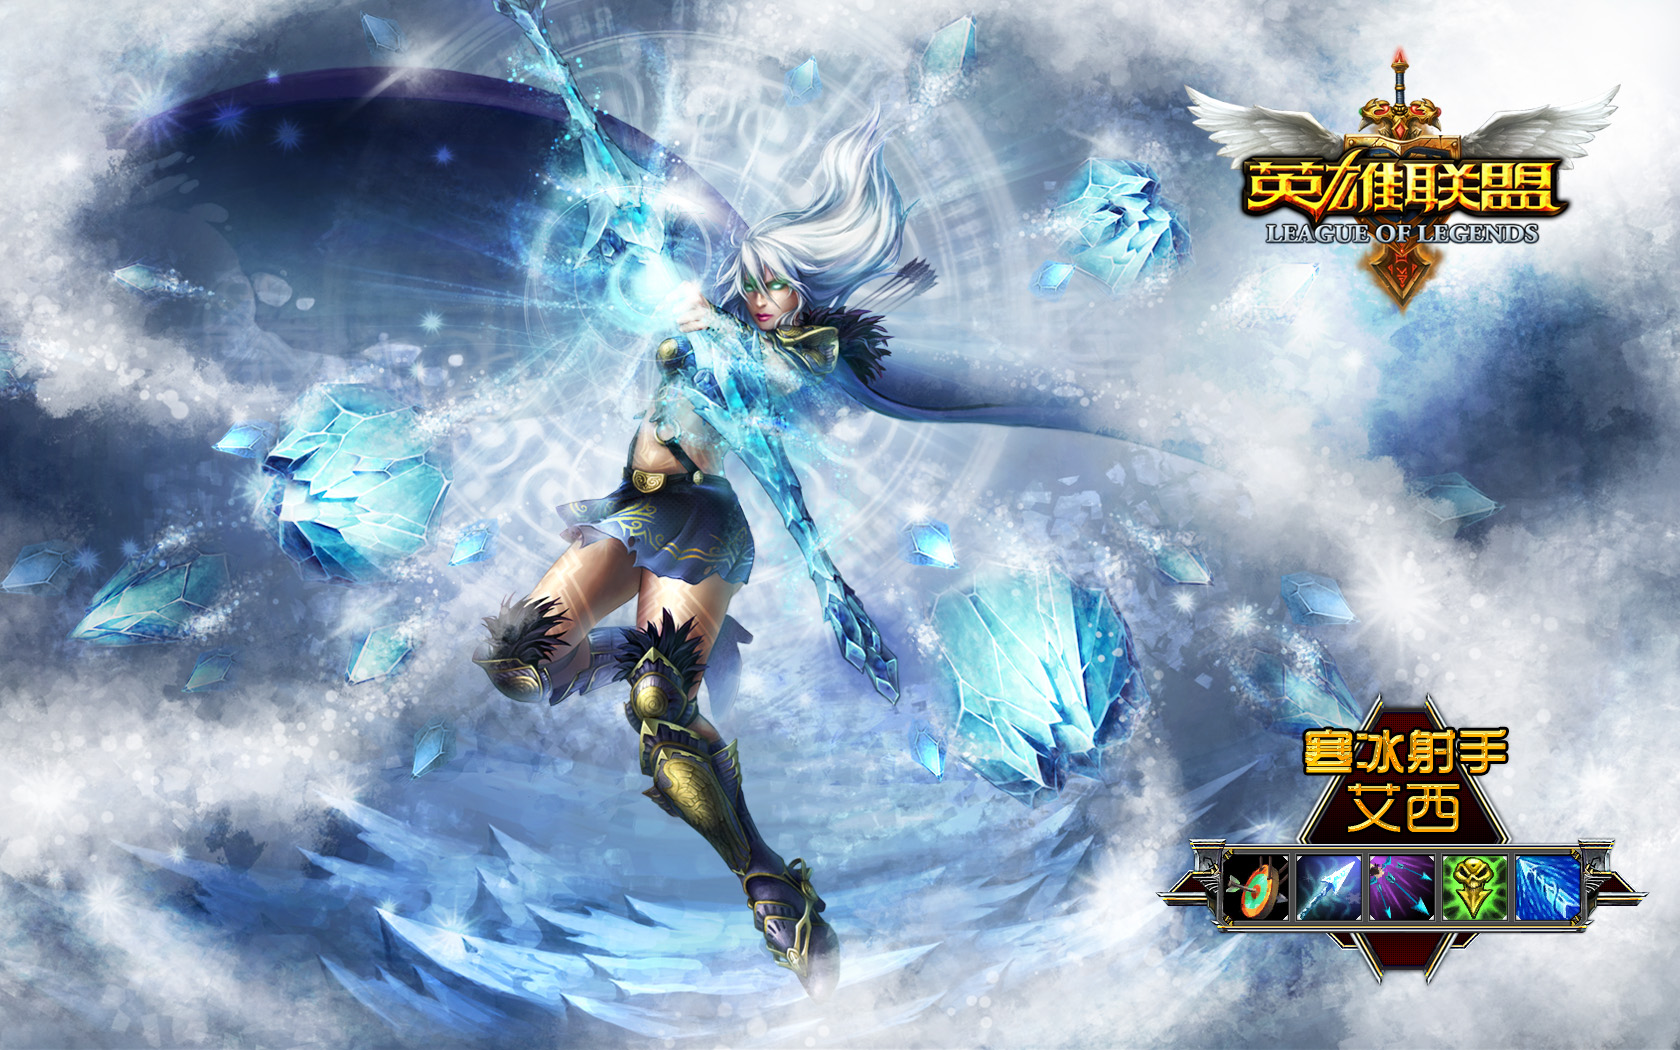 legend wallpaper,action adventure game,games,pc game,strategy video game,cg artwork